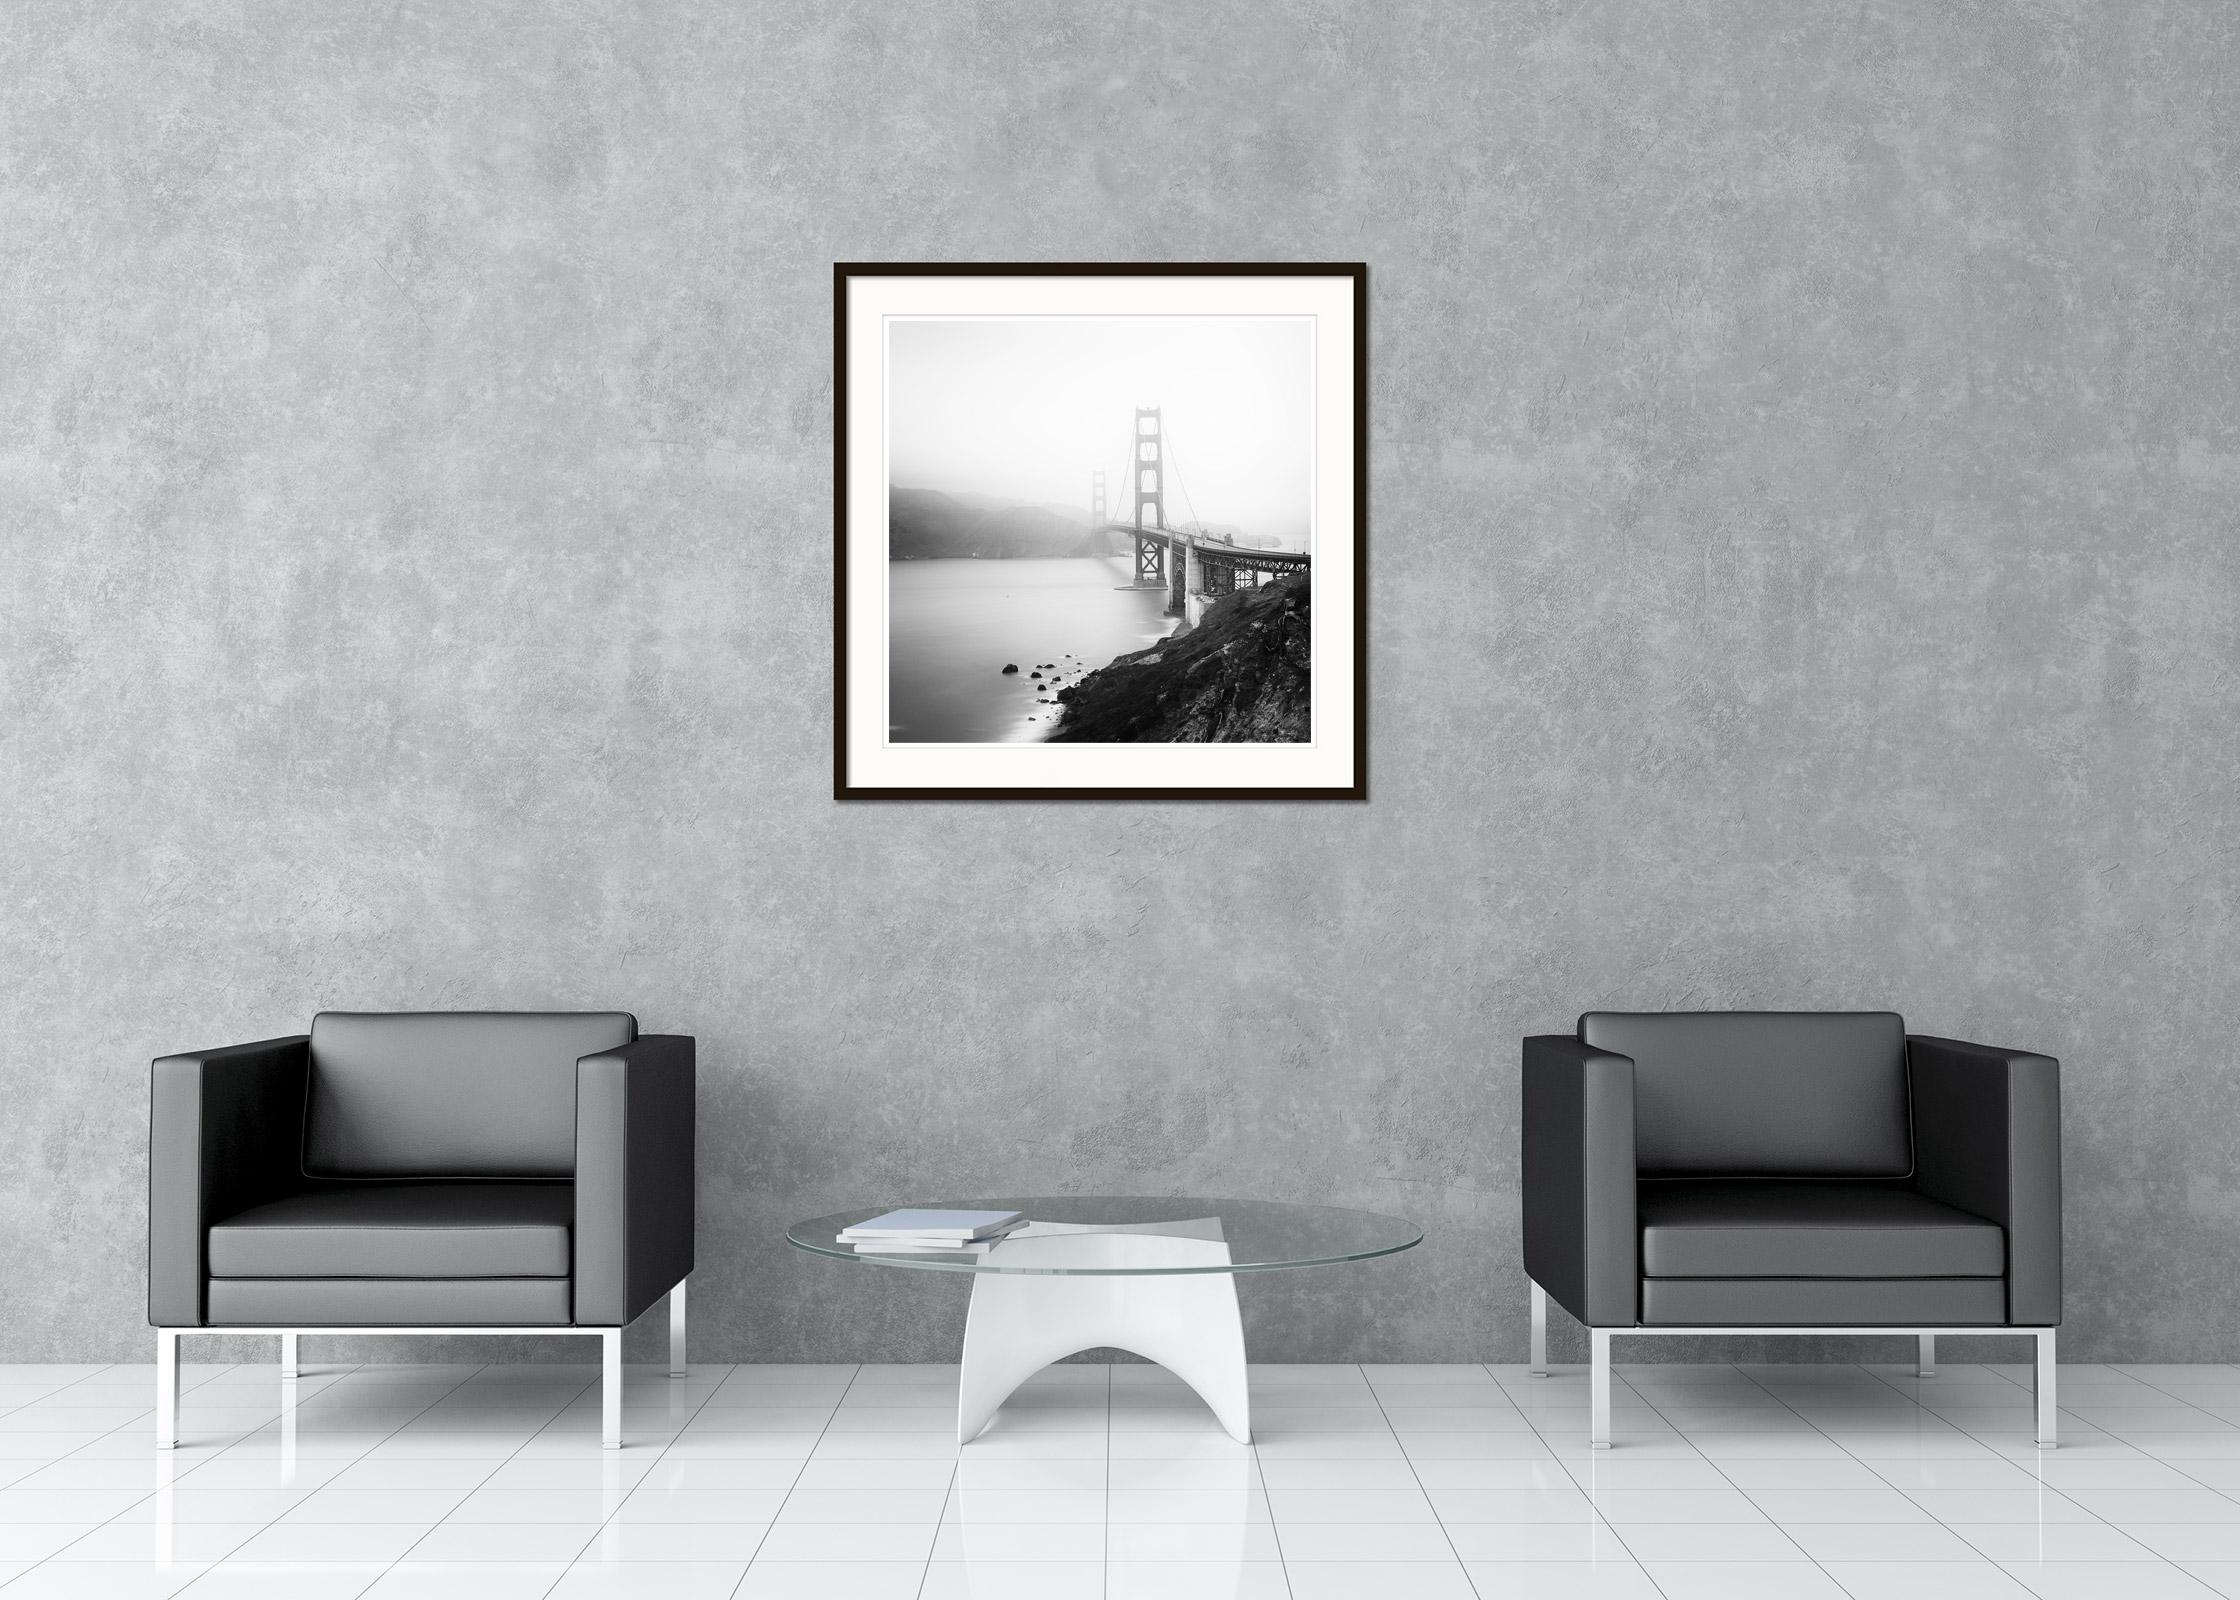 Black and White Fine Art Photography - Golden Gate Bridge, foggy morning, Fort Point, San Francisco, USA. Archival pigment ink print, edition of 9. Signed, titled, dated and numbered by artist. Certificate of authenticity included. Printed with 4cm